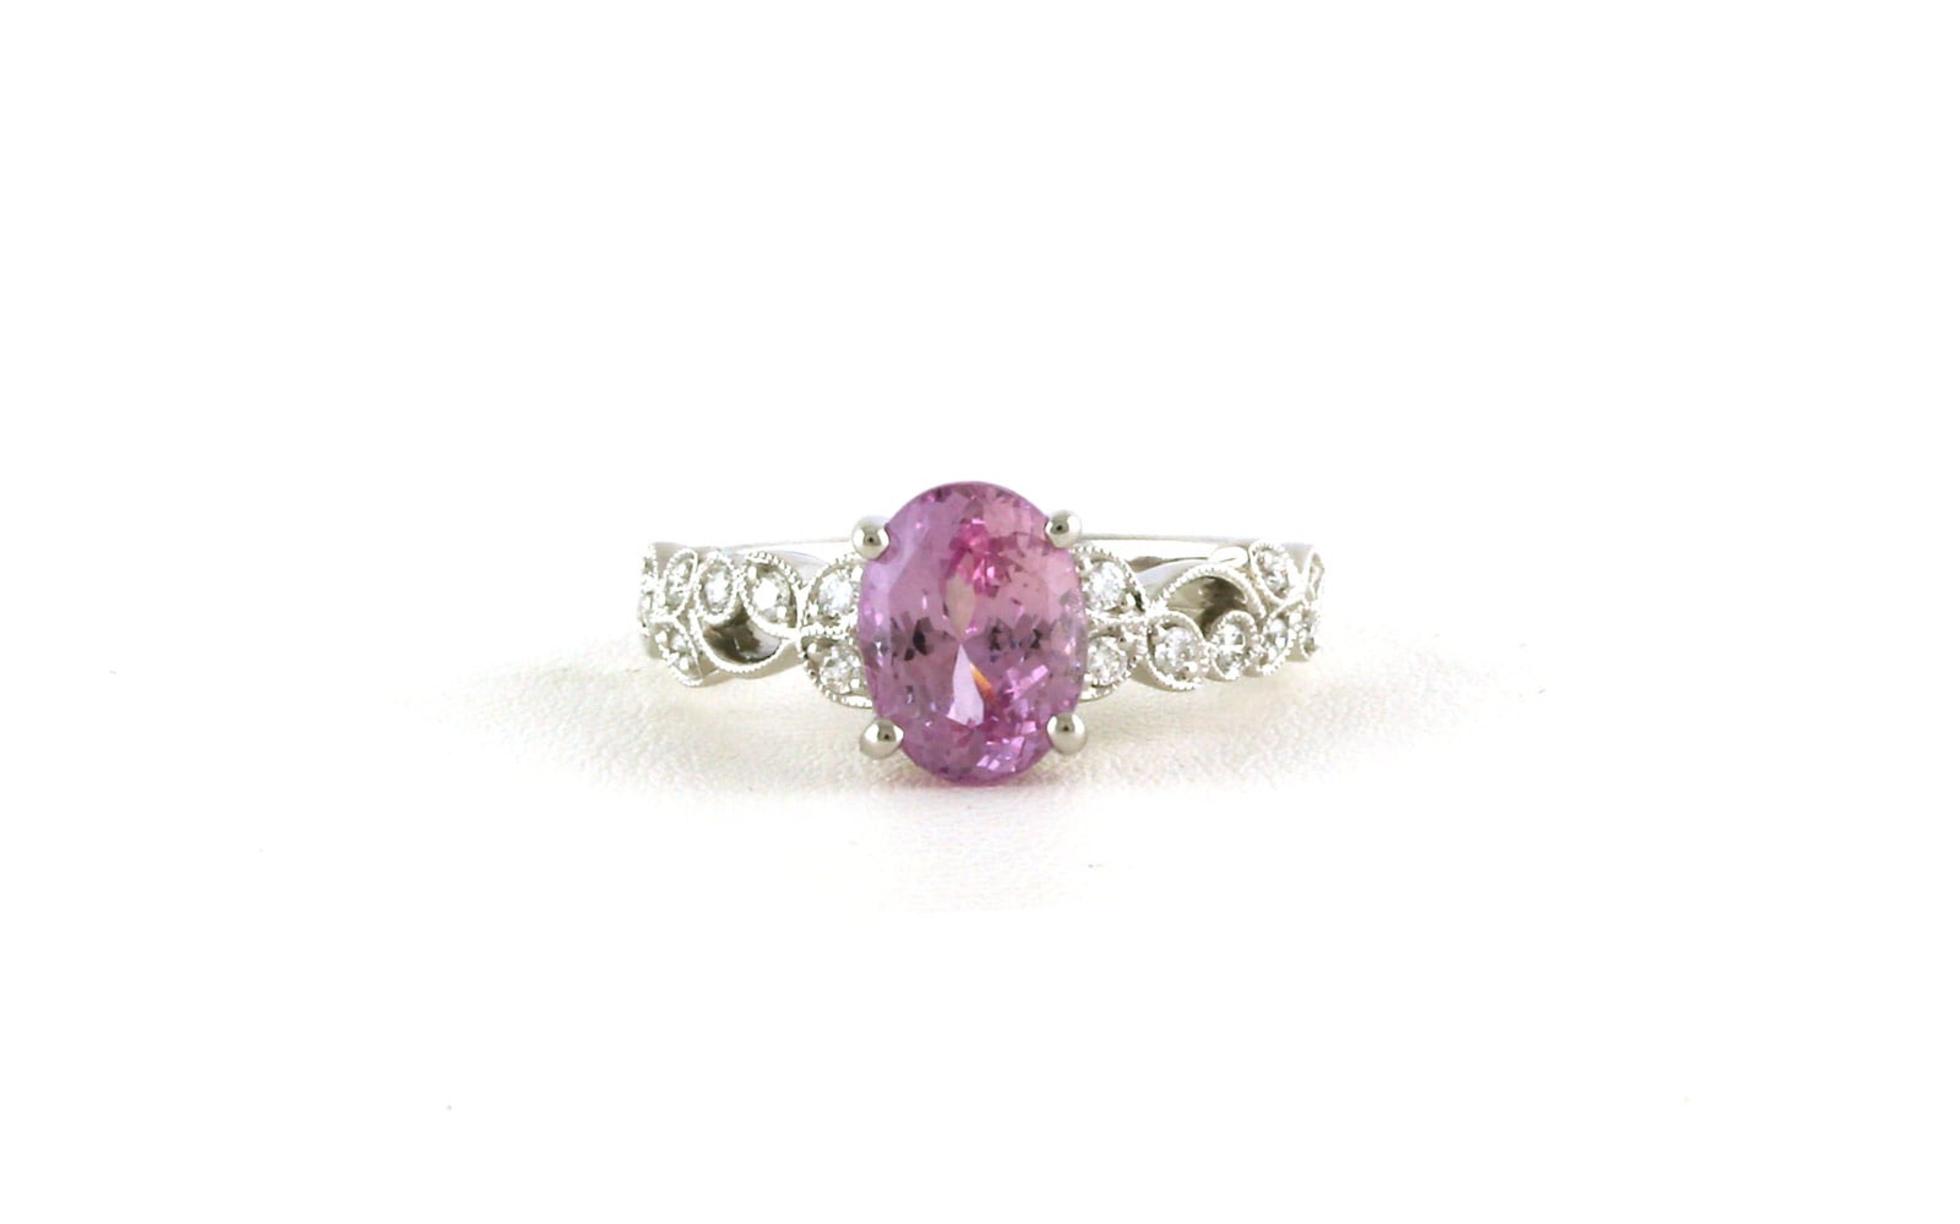 Filigree-style Oval-cut Pink Sapphire Ring in White Gold (2.61cts TWT)